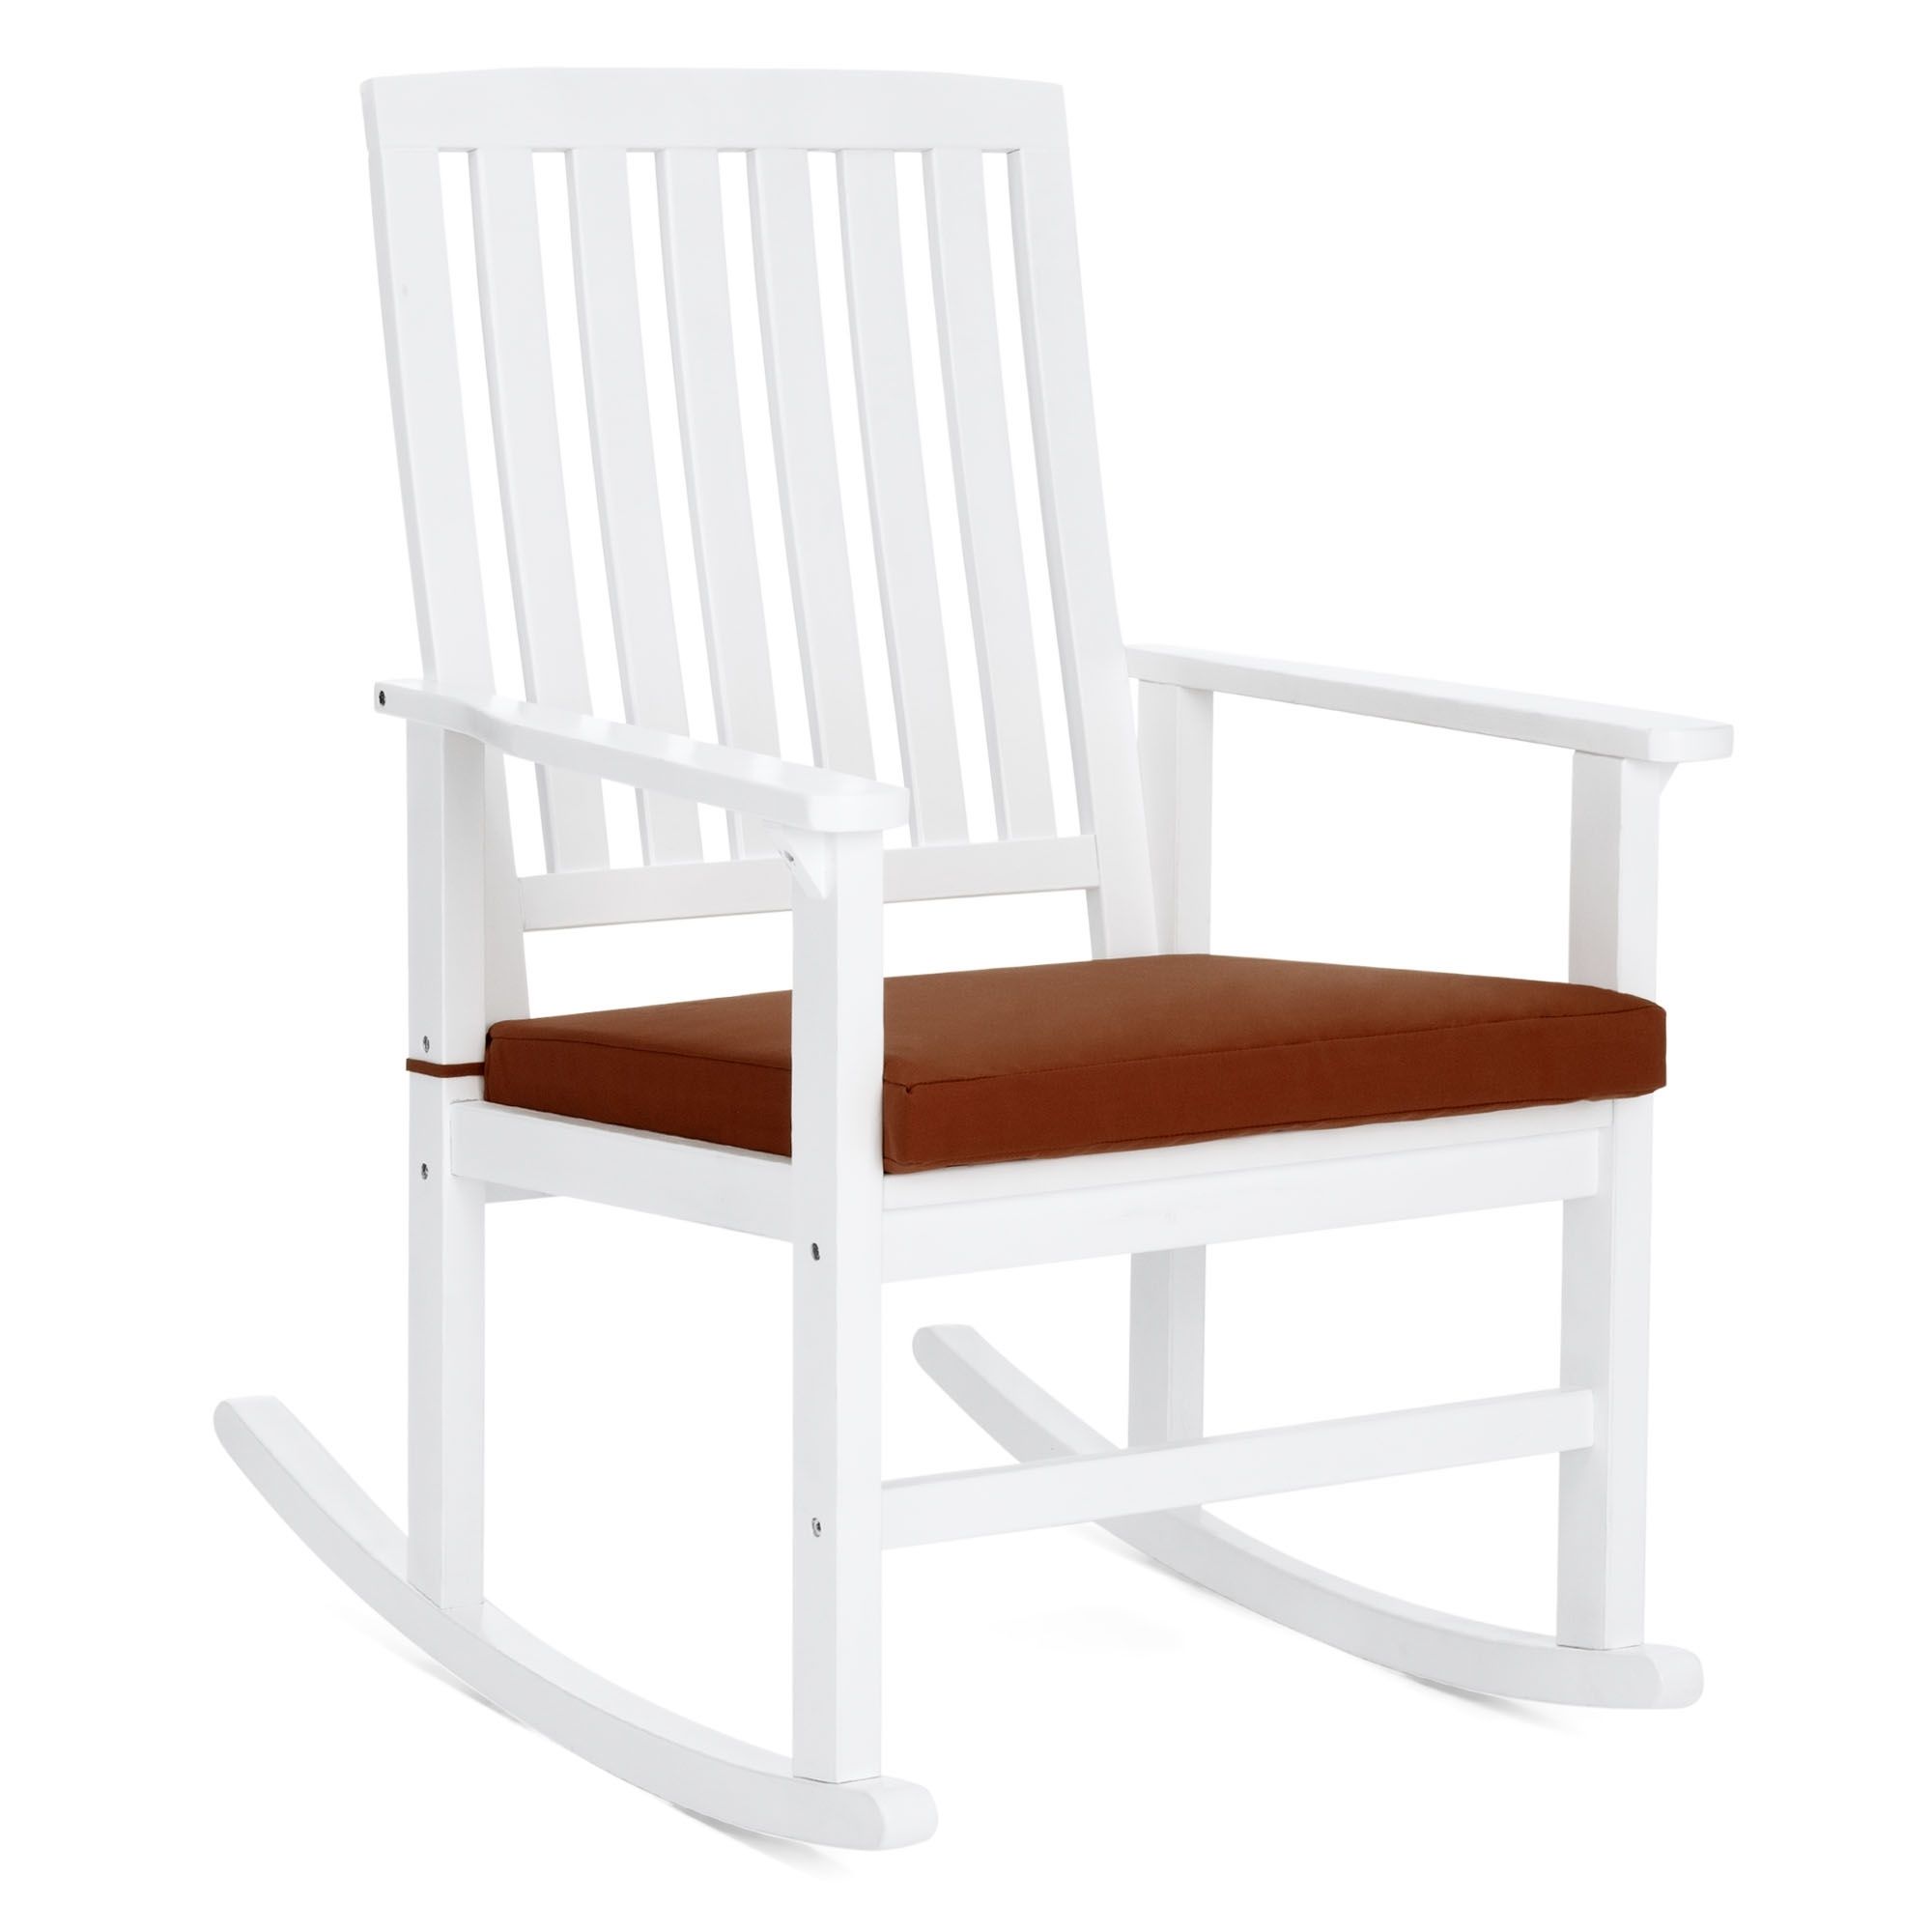 Bestchoiceproducts: Best Choice Products Indoor Outdoor Home Wooden Within Red Patio Rocking Chairs (View 15 of 15)